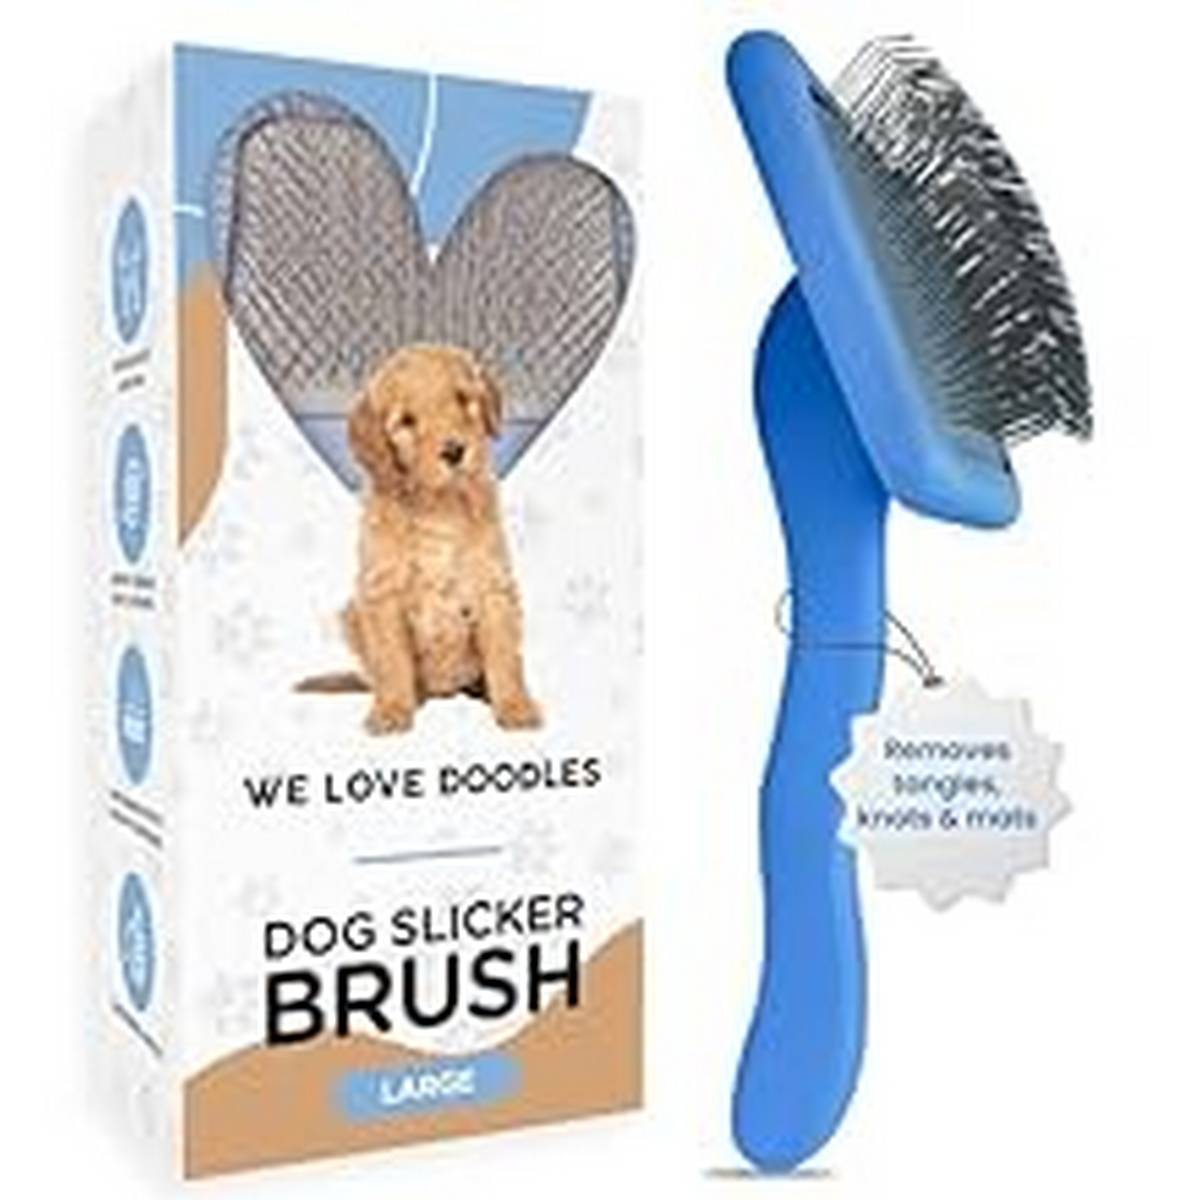 Supplies_We Love Doodles Dog Slicker Brush for Grooming Pet Hair - Best Brushes For Poodle & Golden Doodle - Long Haired Brush For Dogs - Goldendoodle Long Pin Brush For Dematting